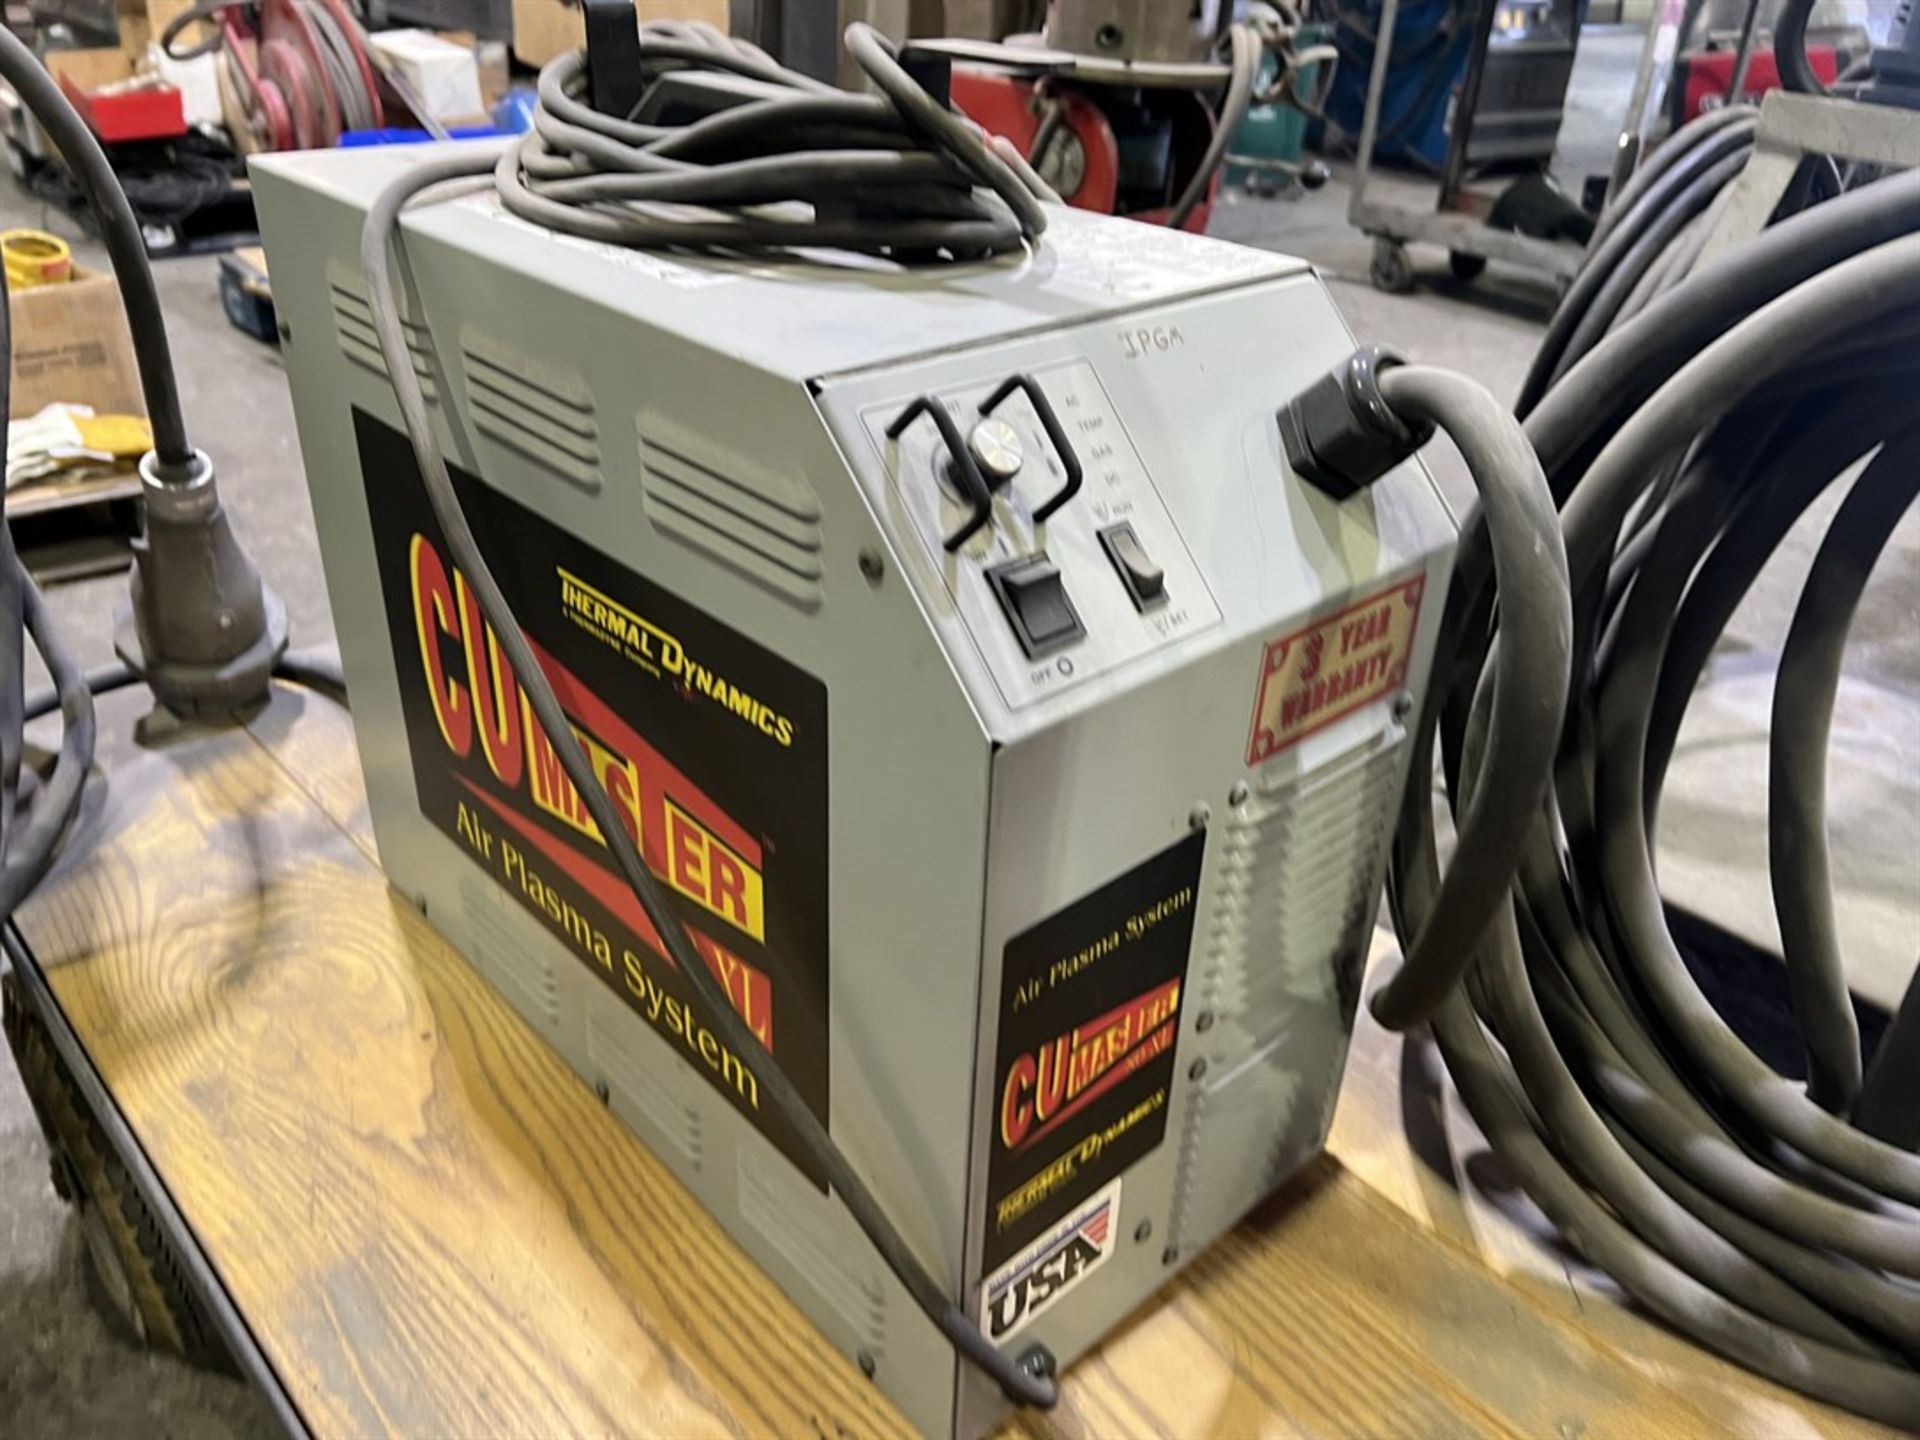 THERMAL DYNAMICS Cutmaster 80XL Plasma Cutter, s/n 00779325 (Building 44) - Image 2 of 3